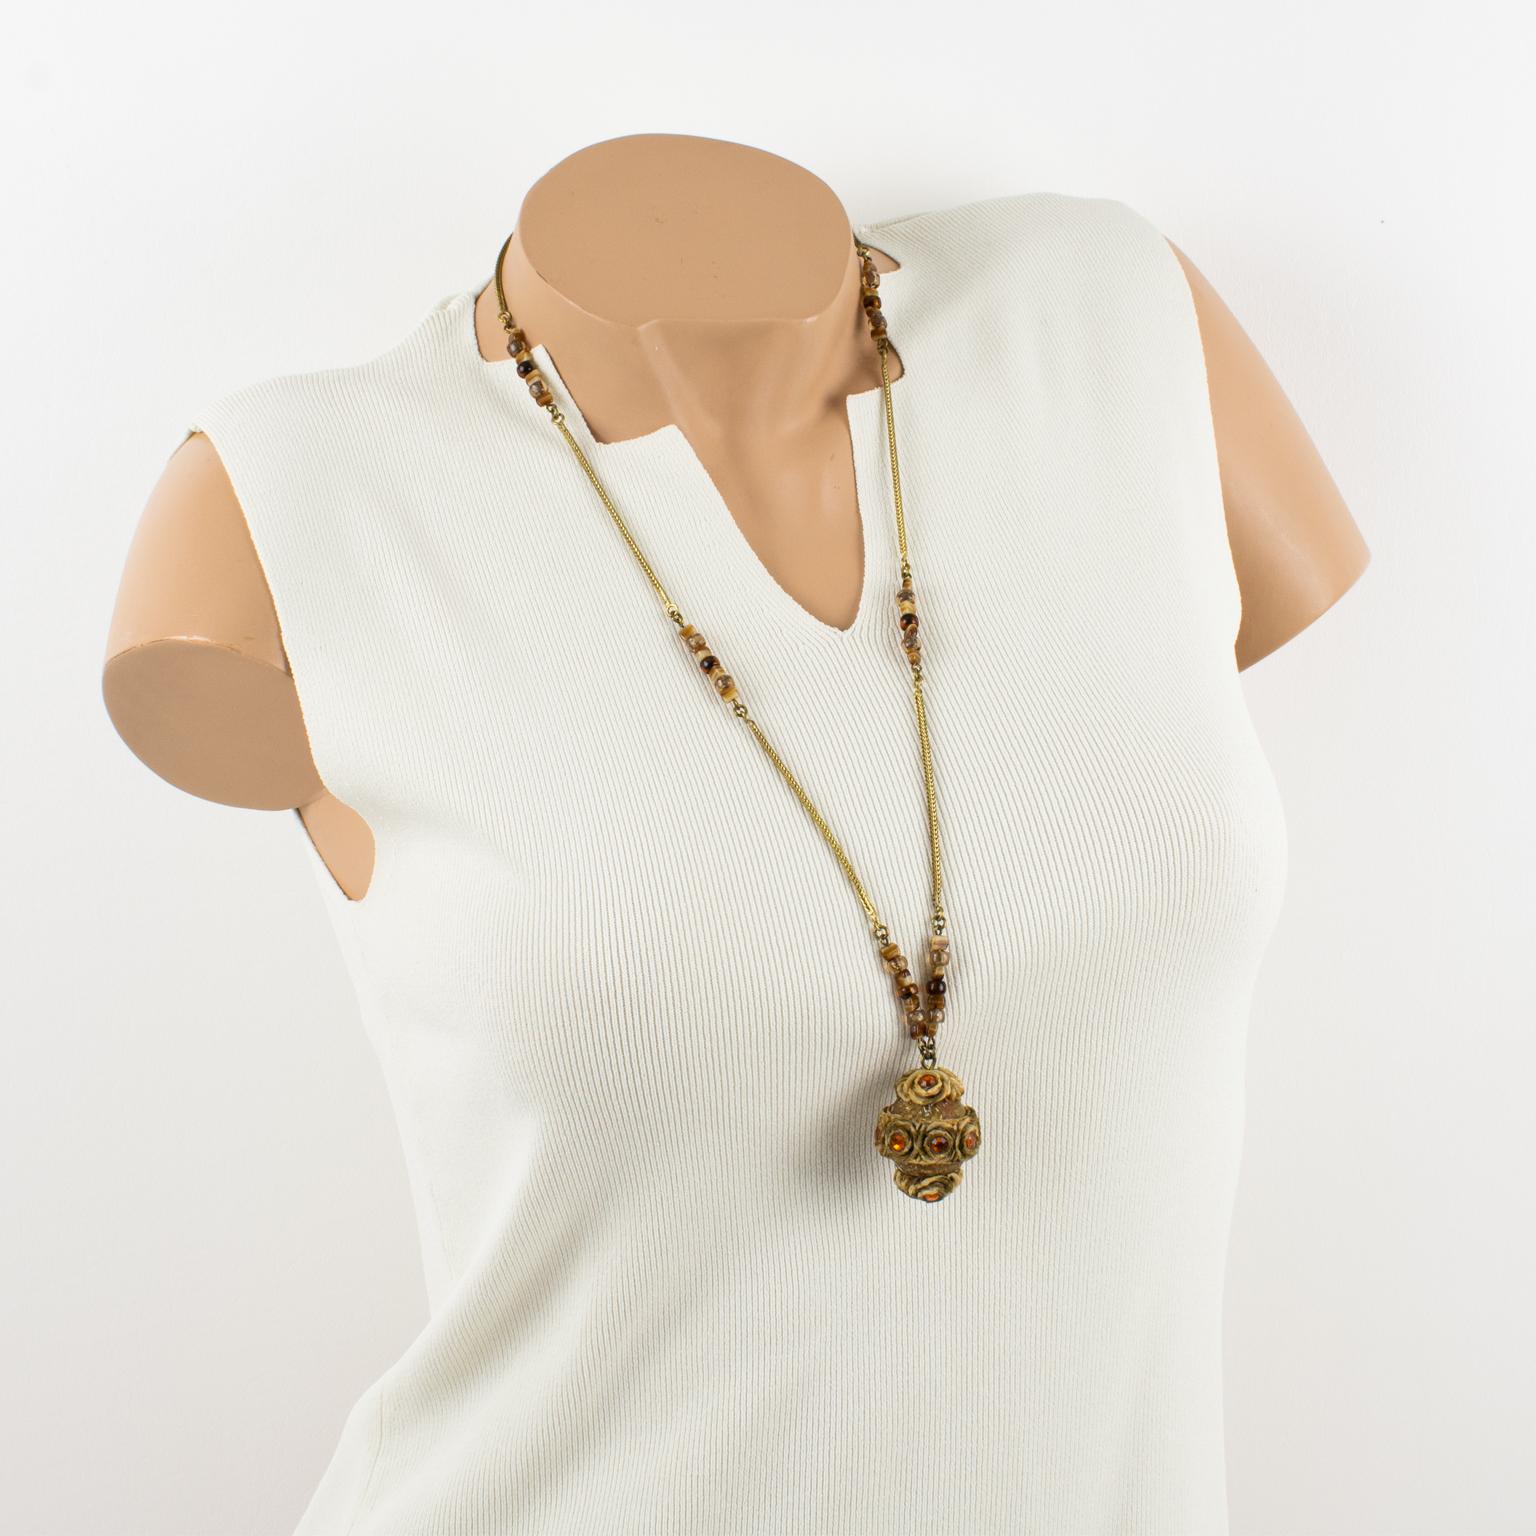 French jewelry artist Henry Perichon (aka Henry) designed this elegant brass and Talosel resin necklace in the 1960s. The long necklace features a brown-beige Talosel resin ball pendant topped with topaz orange crystal faceted rhinestones. The